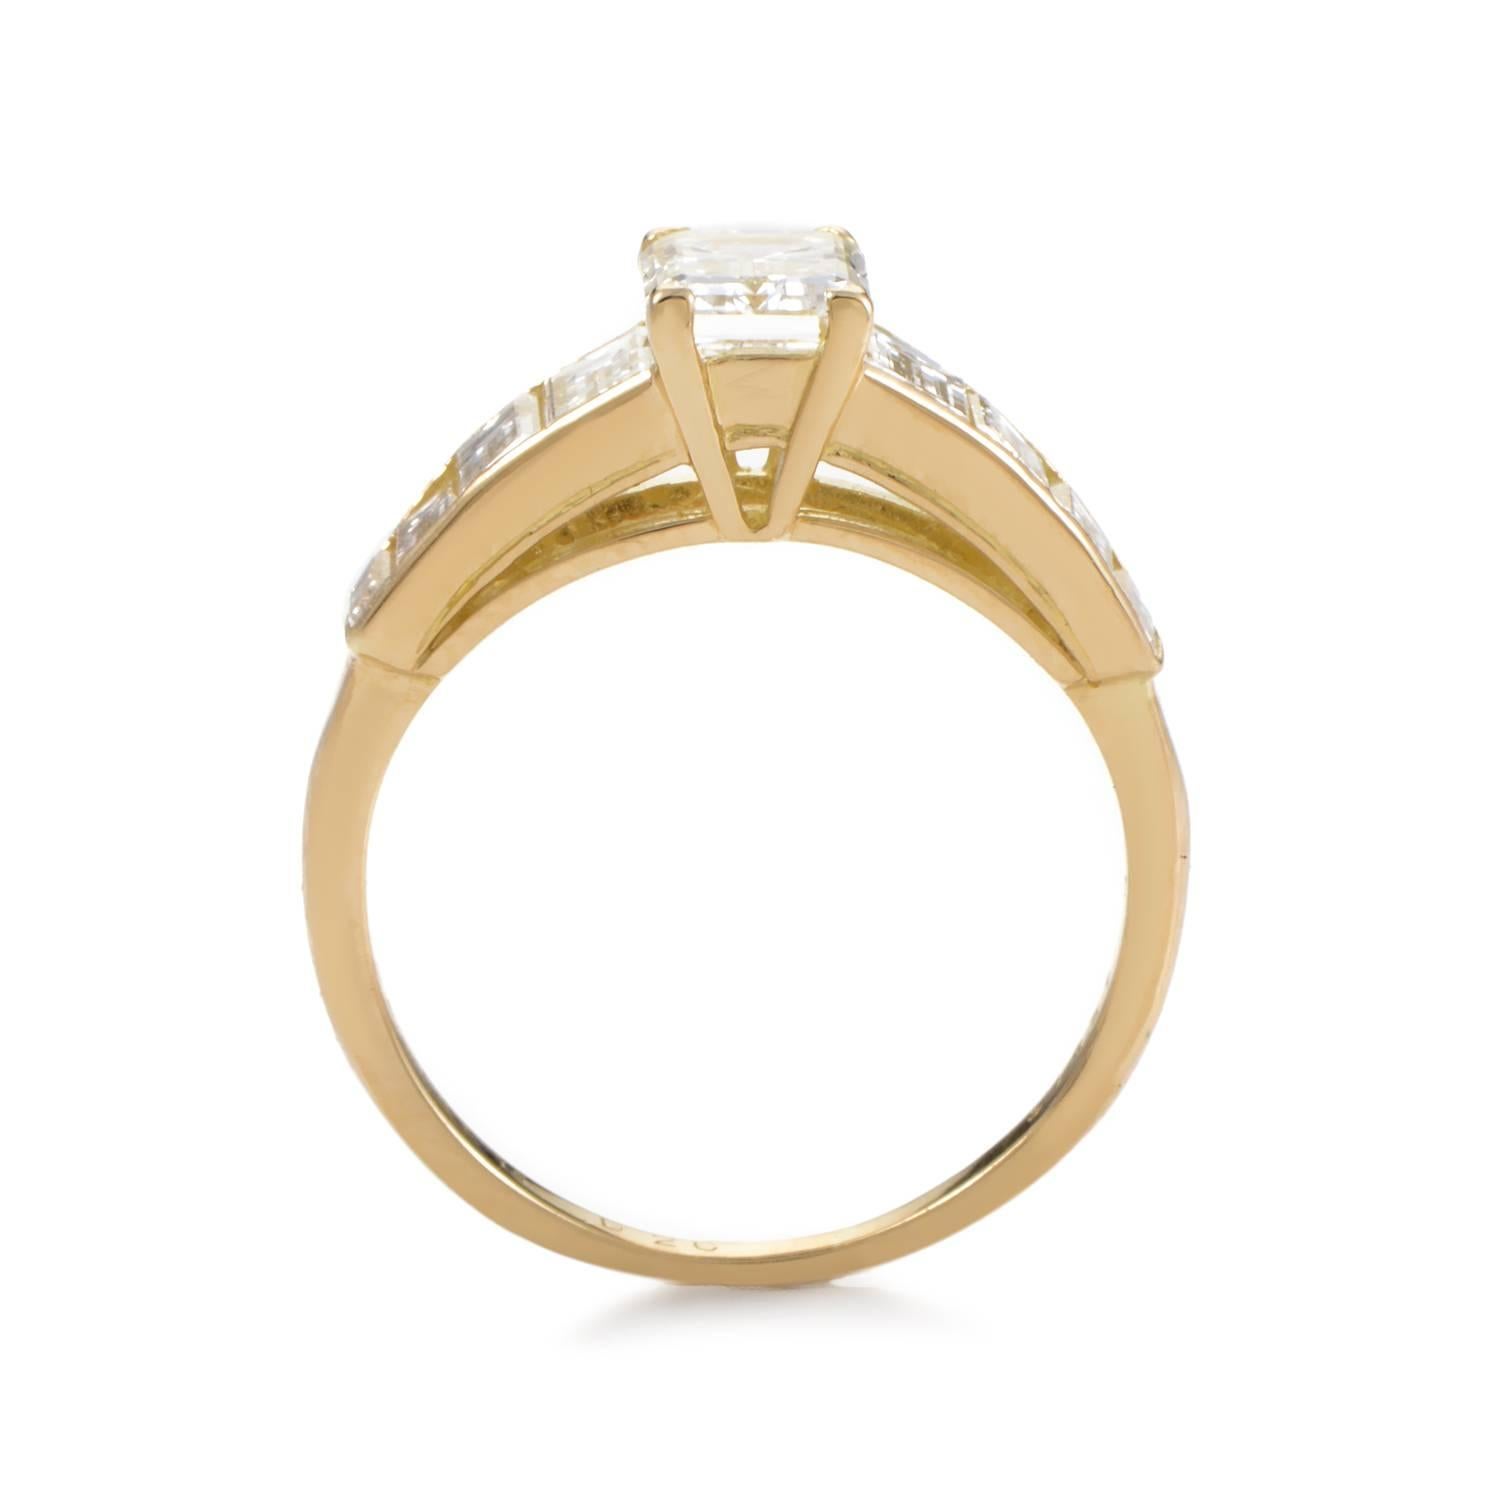 A neat arrangement of diamond stones amounting to 2.00 carats leads the eye up to the central spot of this magnificent 18K yellow gold engagement ring from Van Cleef & Arpels, where a spellbinding 0.86ct central diamond produces exceptional